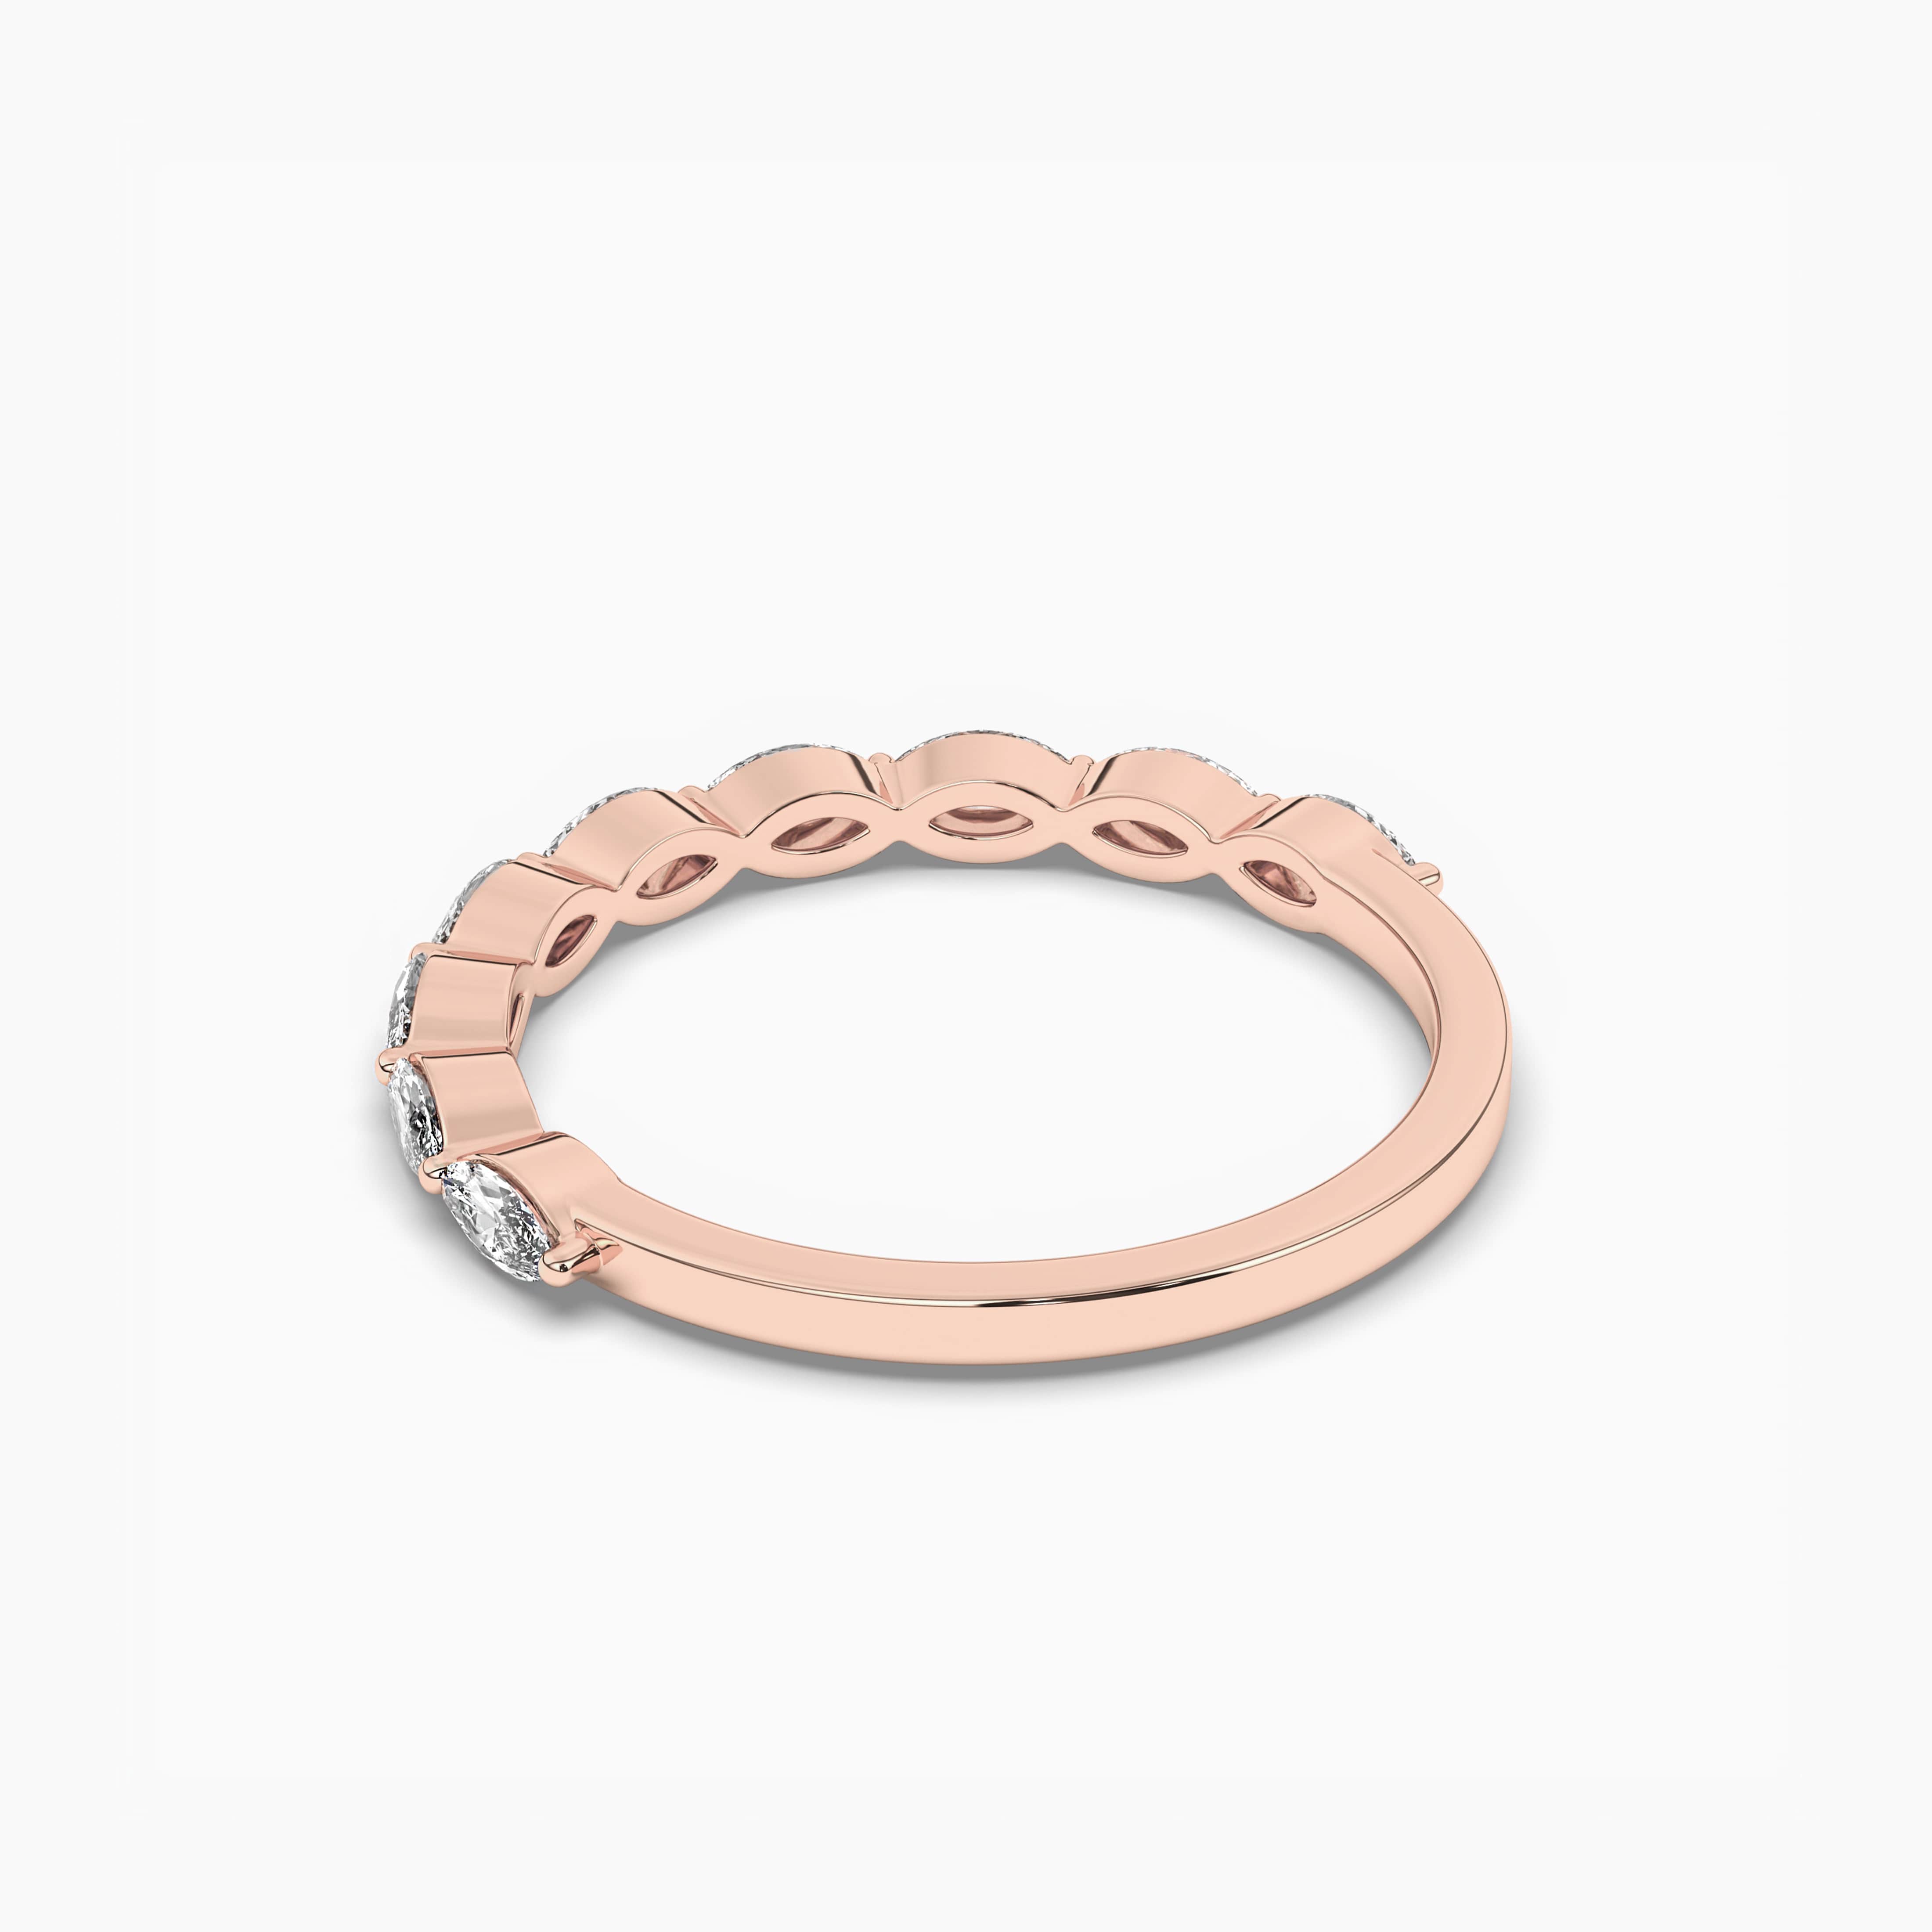 Marquise Diamond Eternity Wedding Band In Rose Gold For Woman Gift